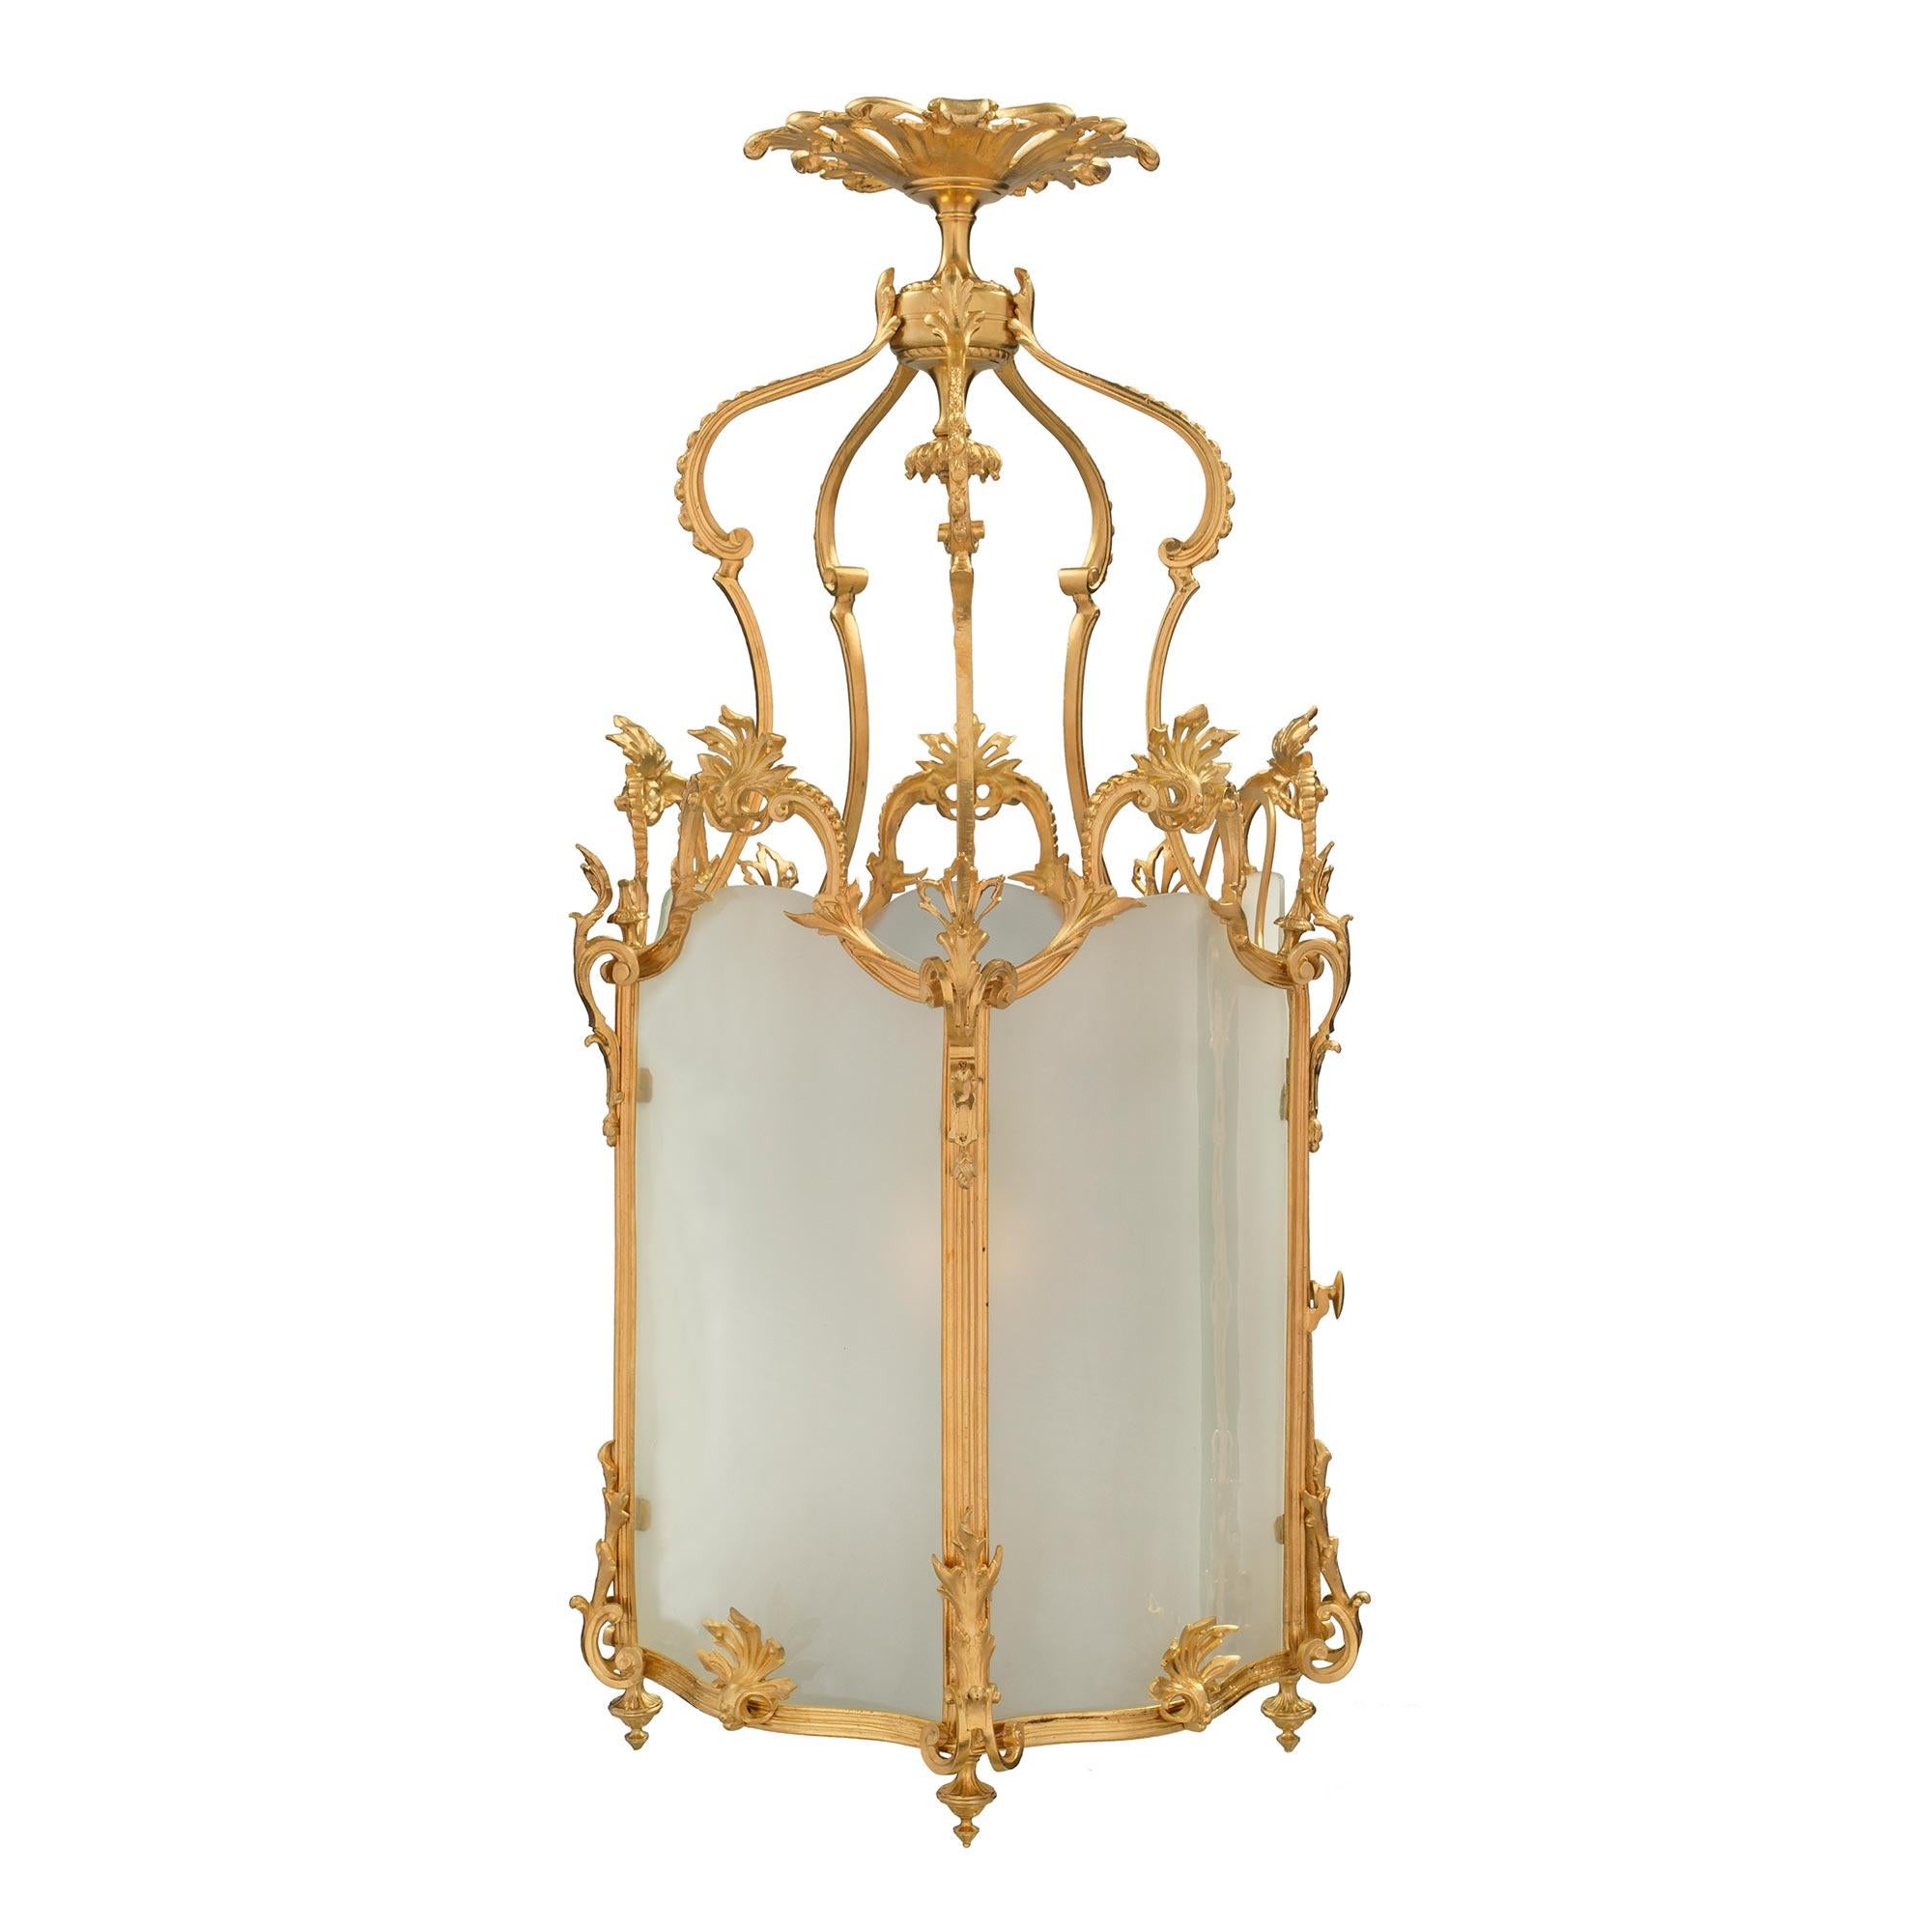 A striking French 19th century Louis XV st. ormolu and frosted glass pentagonal lantern. The lantern displays five topie shaped bottom finial and a beautiful and most unique scalloped shape throughout. The original curved frosted glass sides are